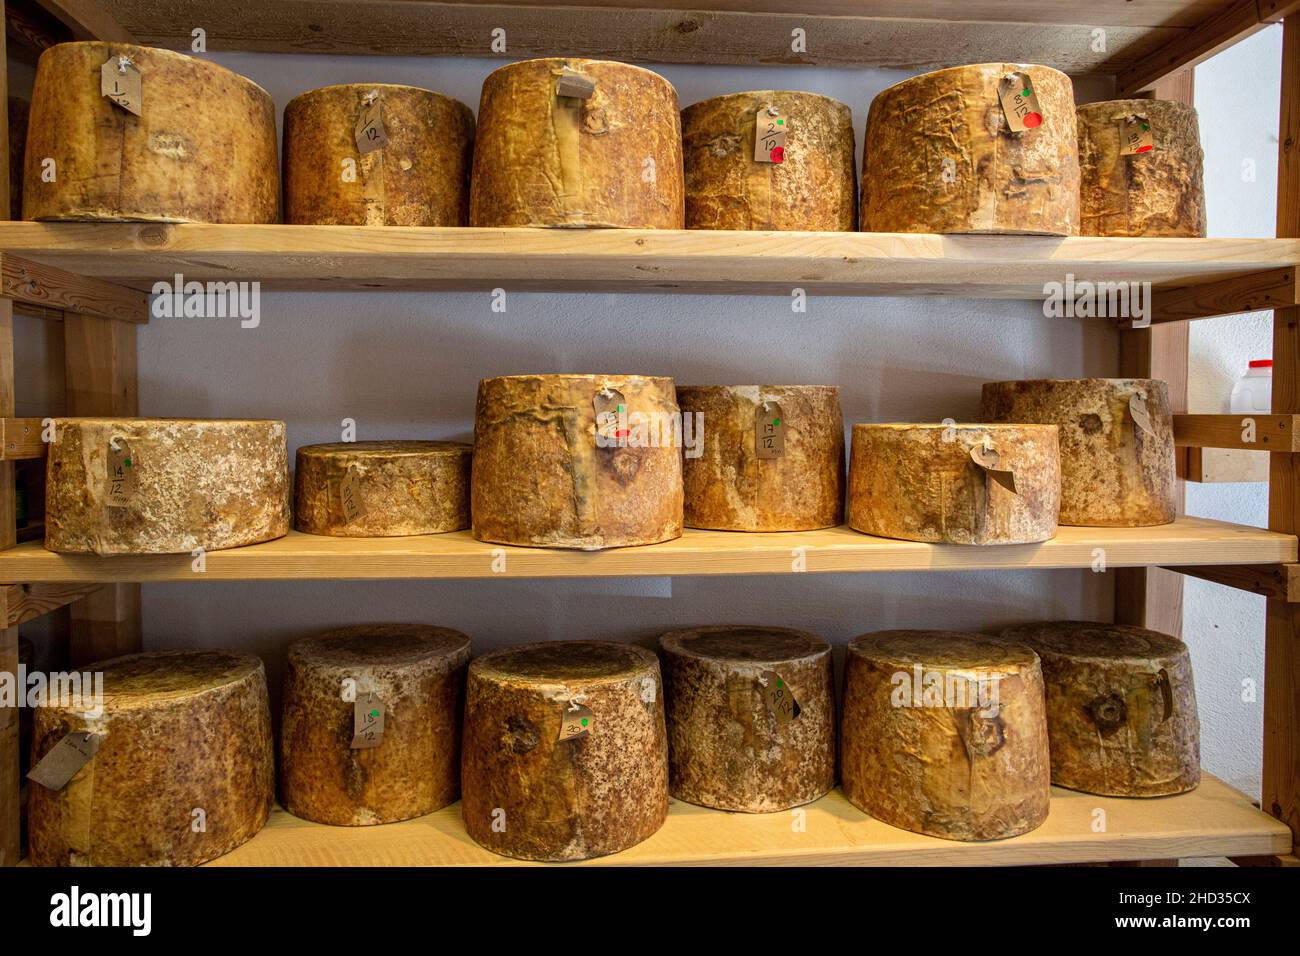 Neal s Yard Dairy selling cheese at Borough Market in Southwark, London, England. Stock Photo